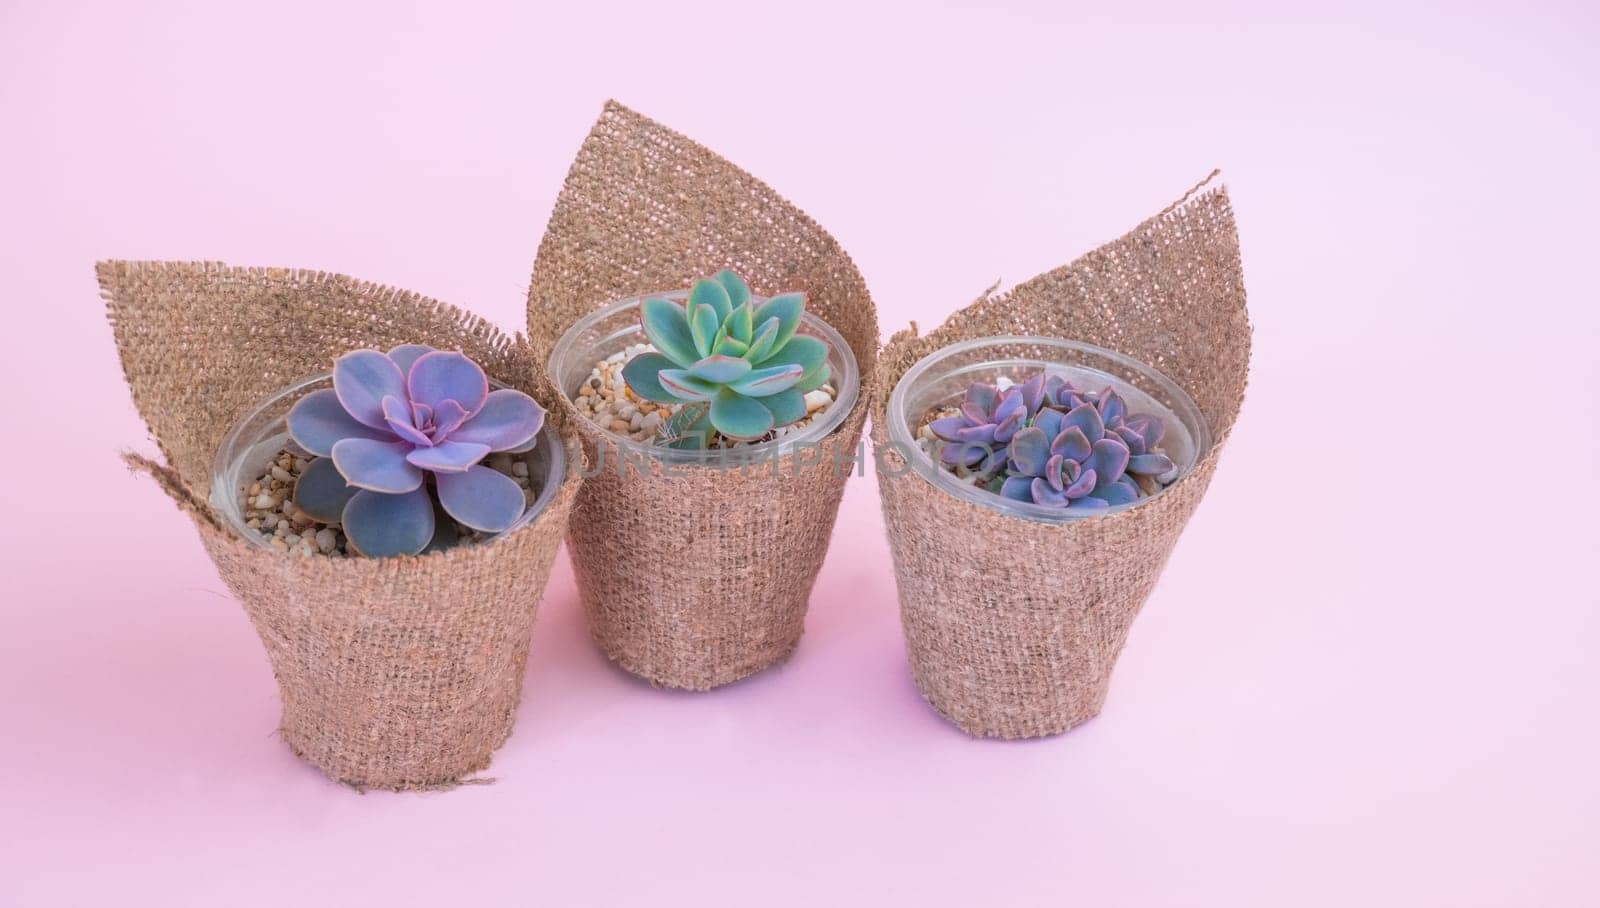 Three small pots wrapped in burlap with succulent flowers on a pink pastel background.